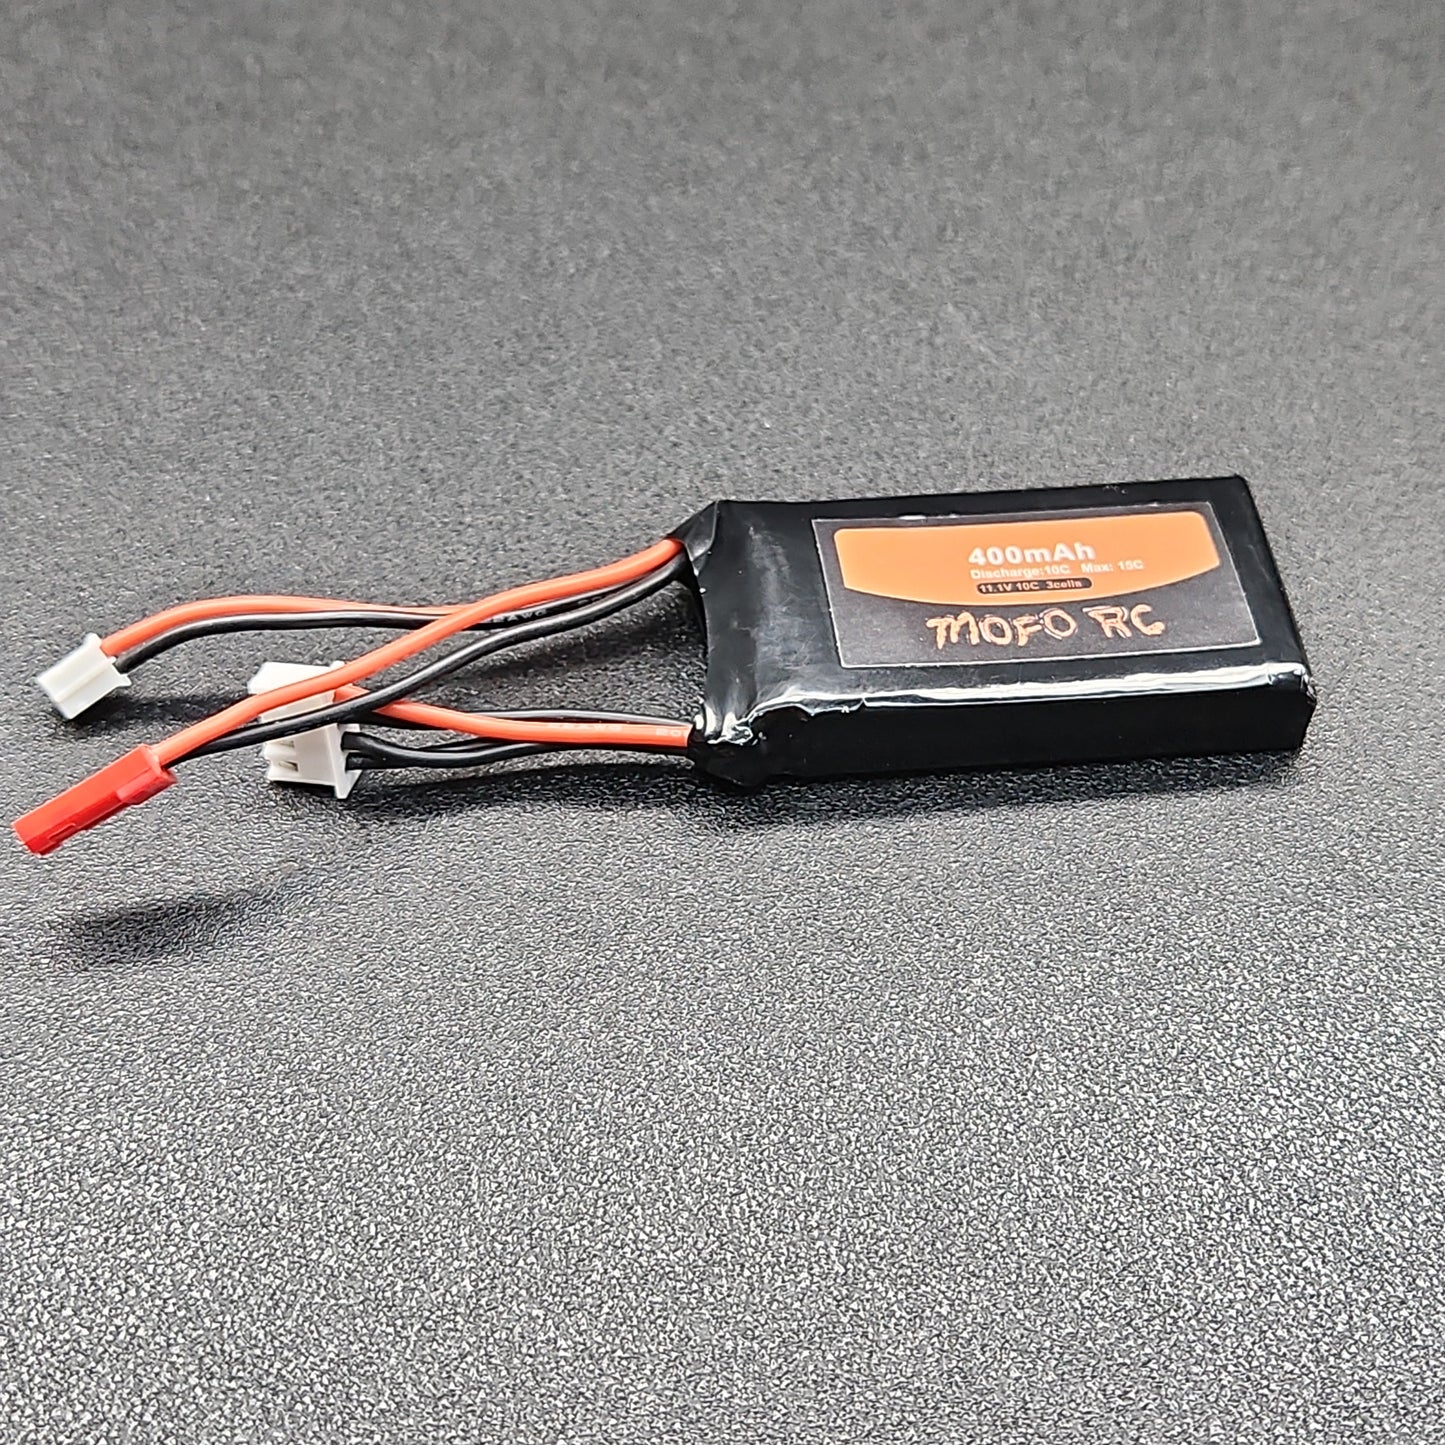 Hi Perf. Batteries for the SCX24, AX24 and others Read Description fully